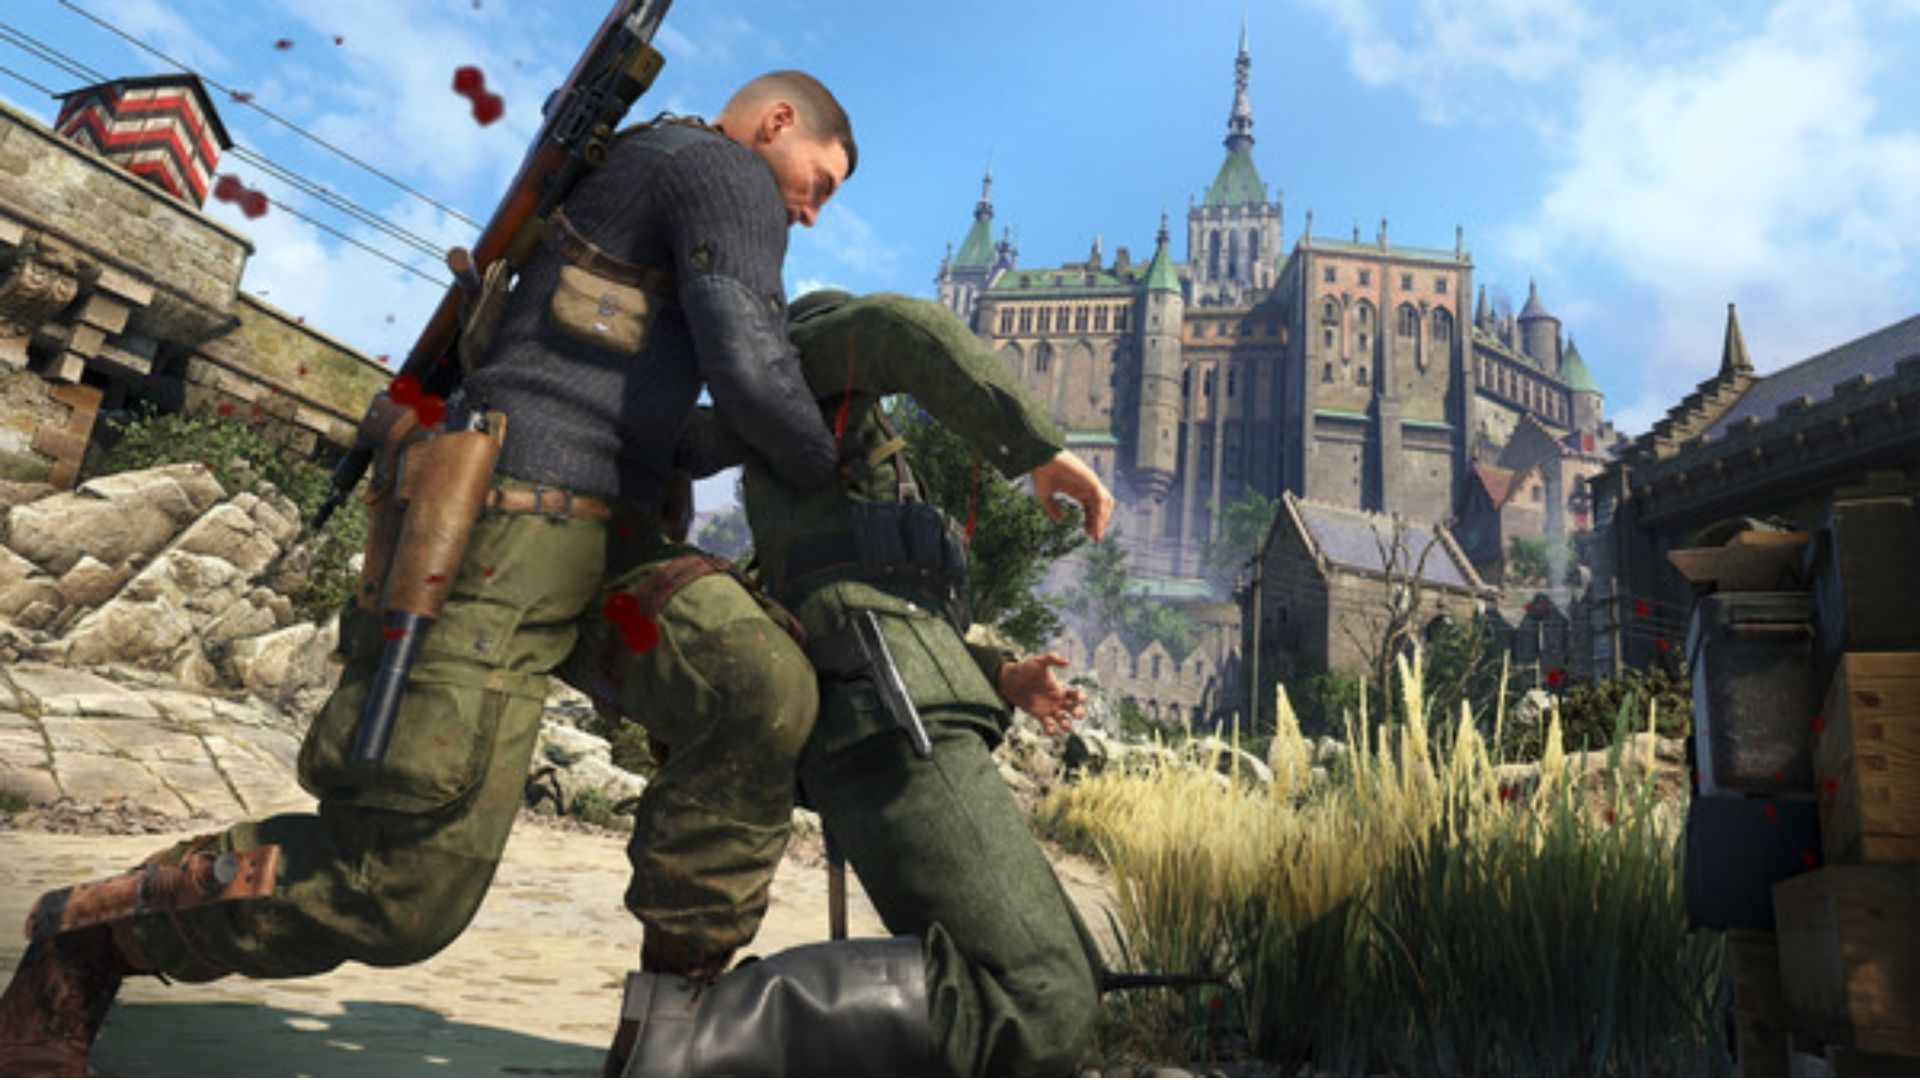 New game coming in May: Sniper Elite 5